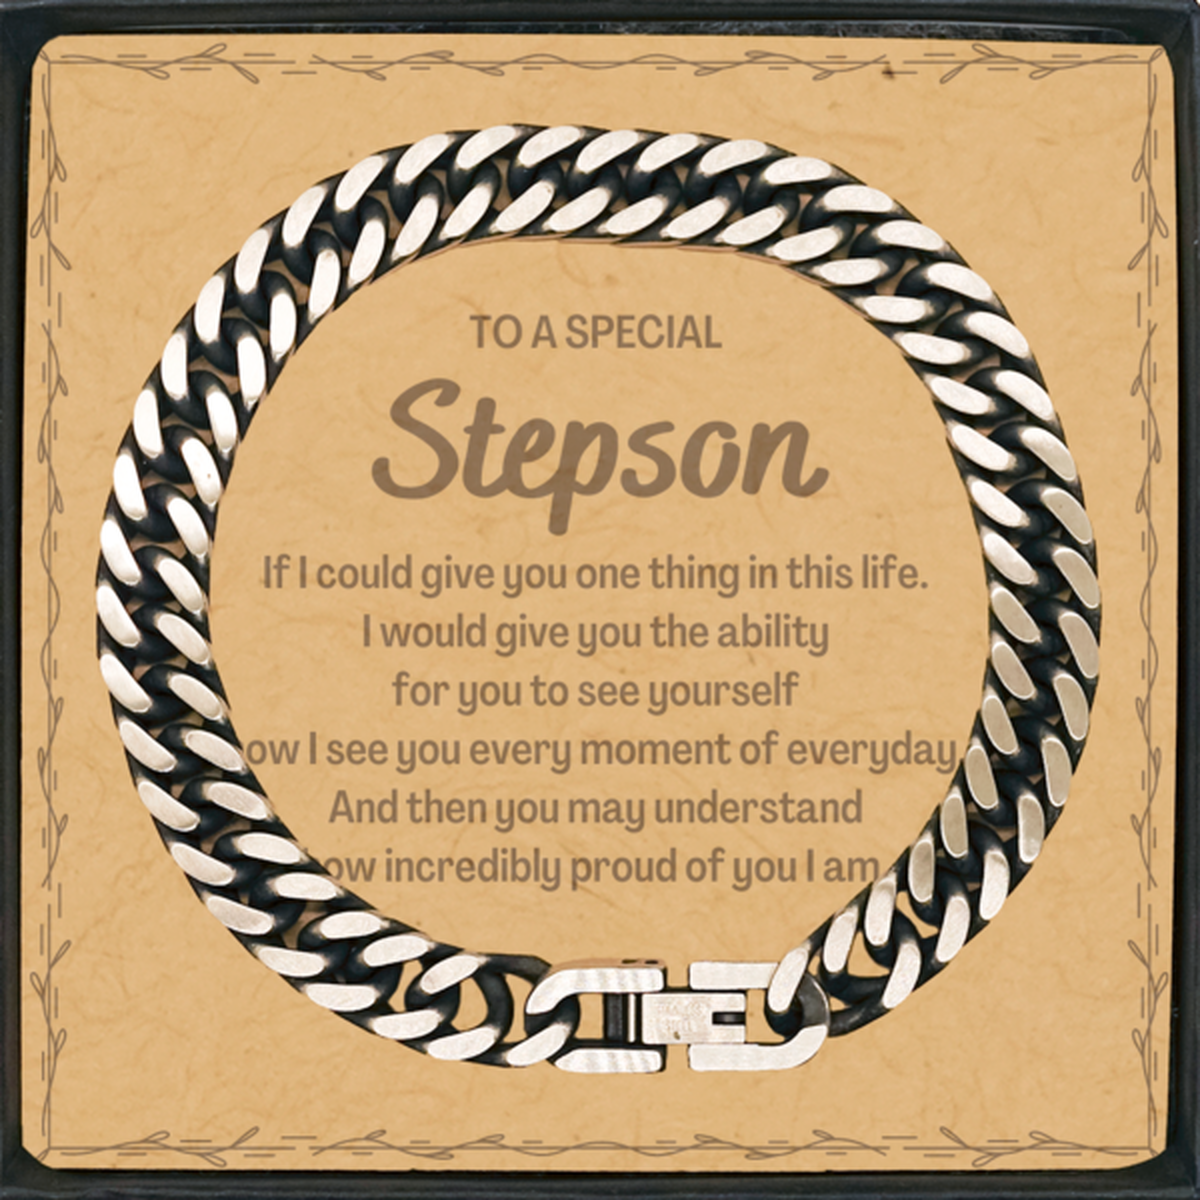 To My Stepson Cuban Link Chain Bracelet, Gifts For Stepson Message Card, Inspirational Gifts for Christmas Birthday, Epic Gifts for Stepson To A Special Stepson how incredibly proud of you I am